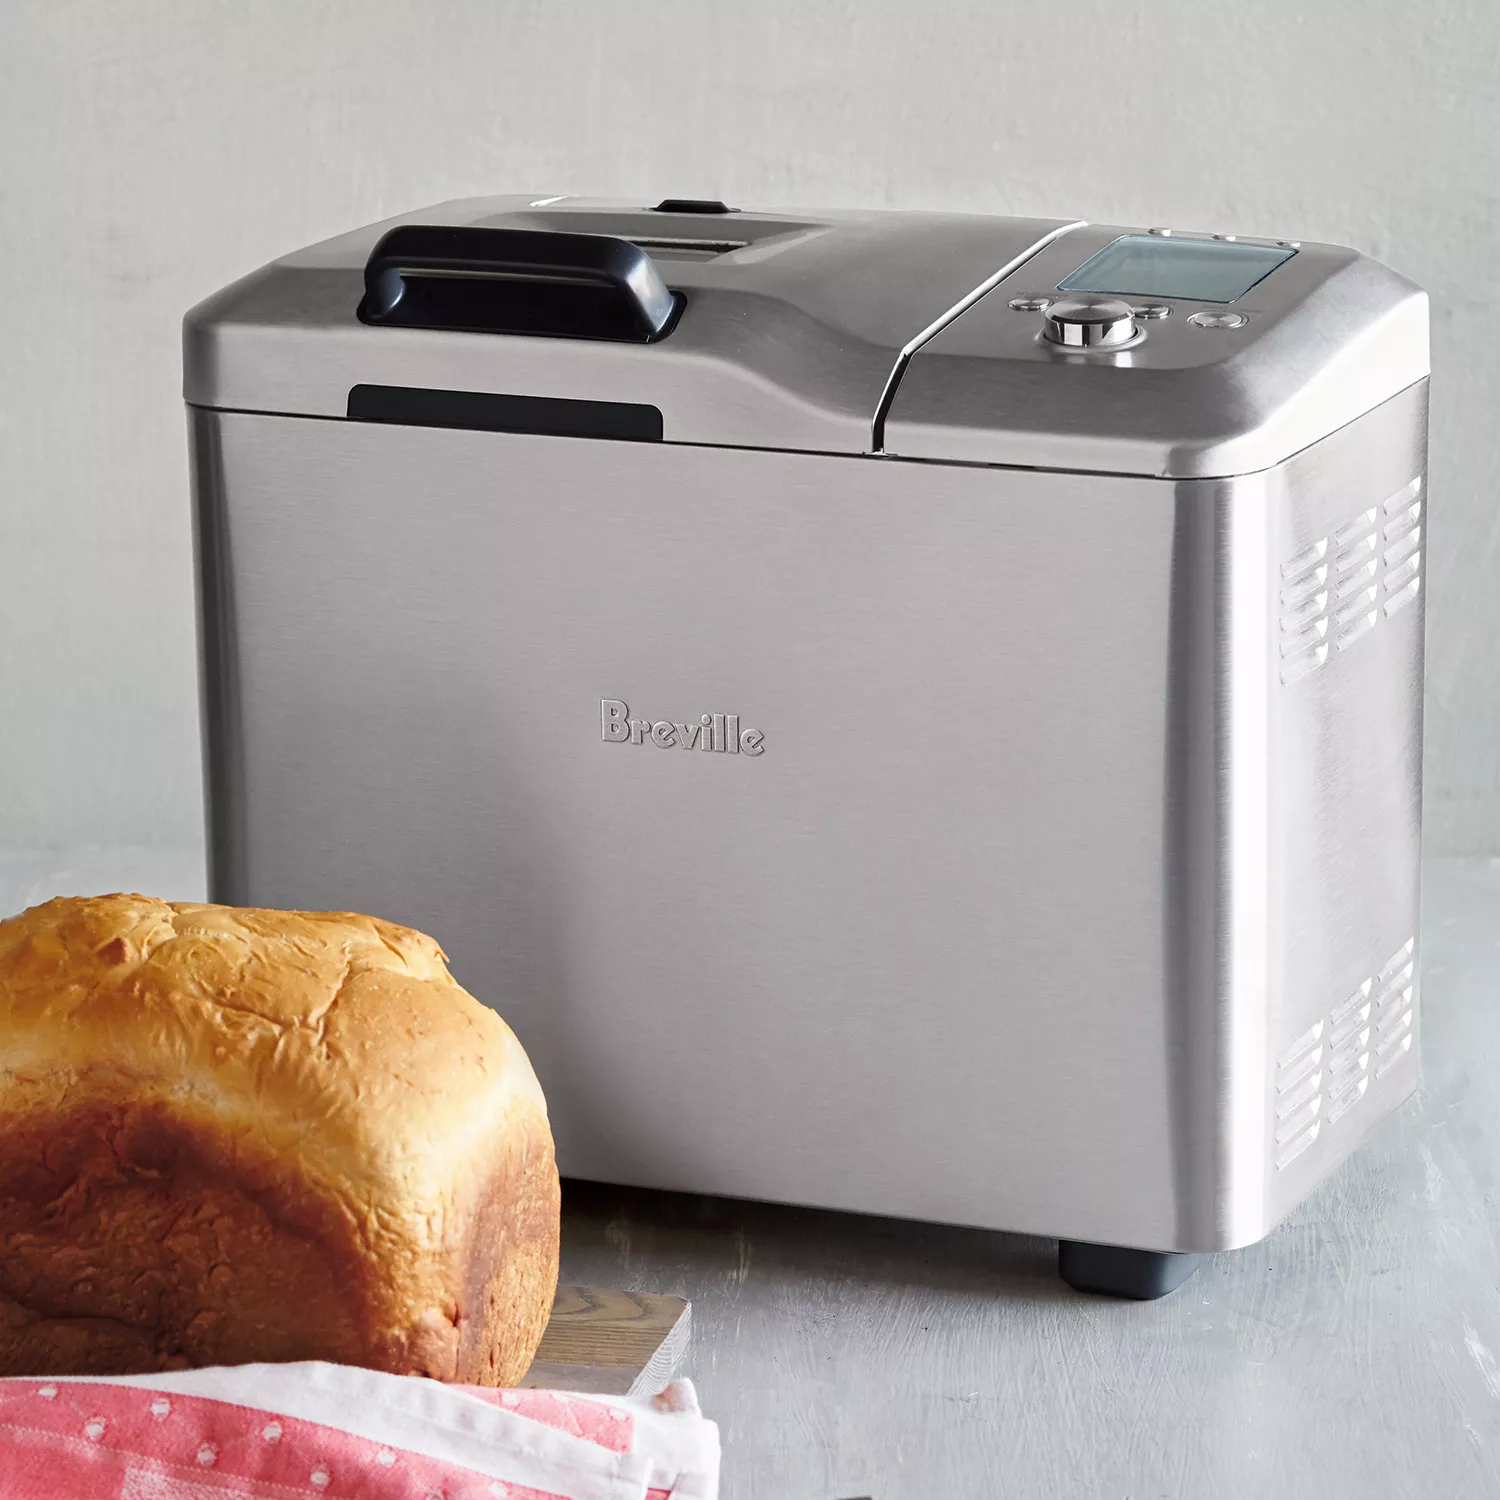 Multi-functional Fully Automatic Bread Maker & Toaster Machine, A